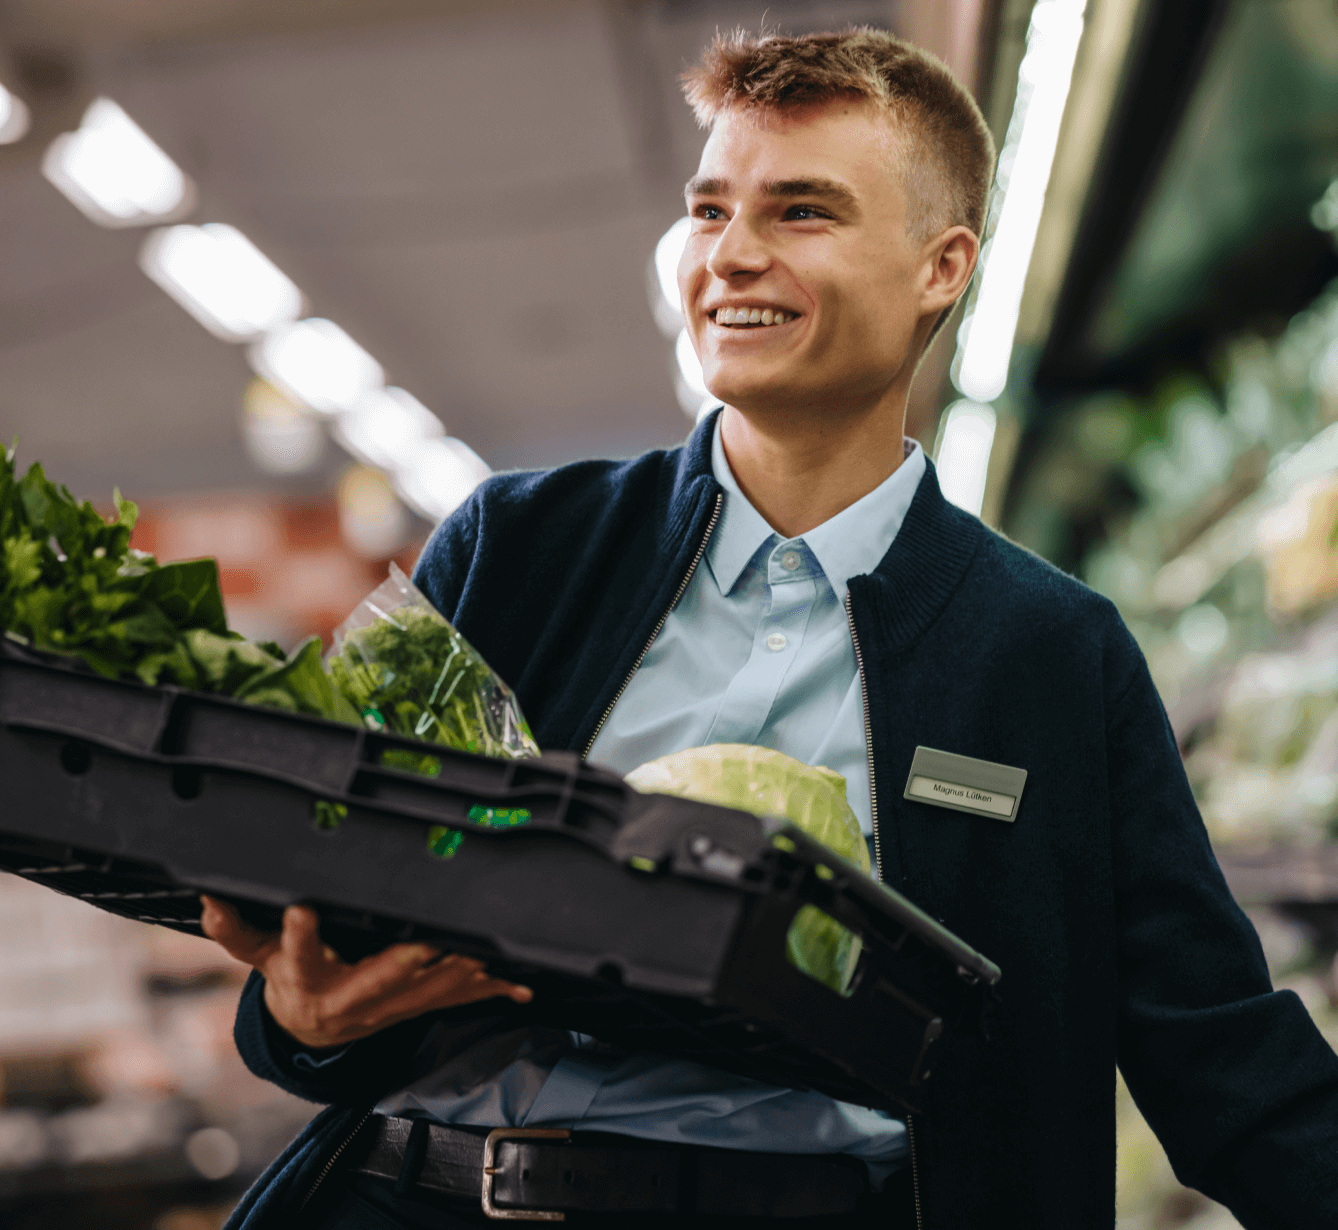 A grocery store employee is holding a vegetable container.